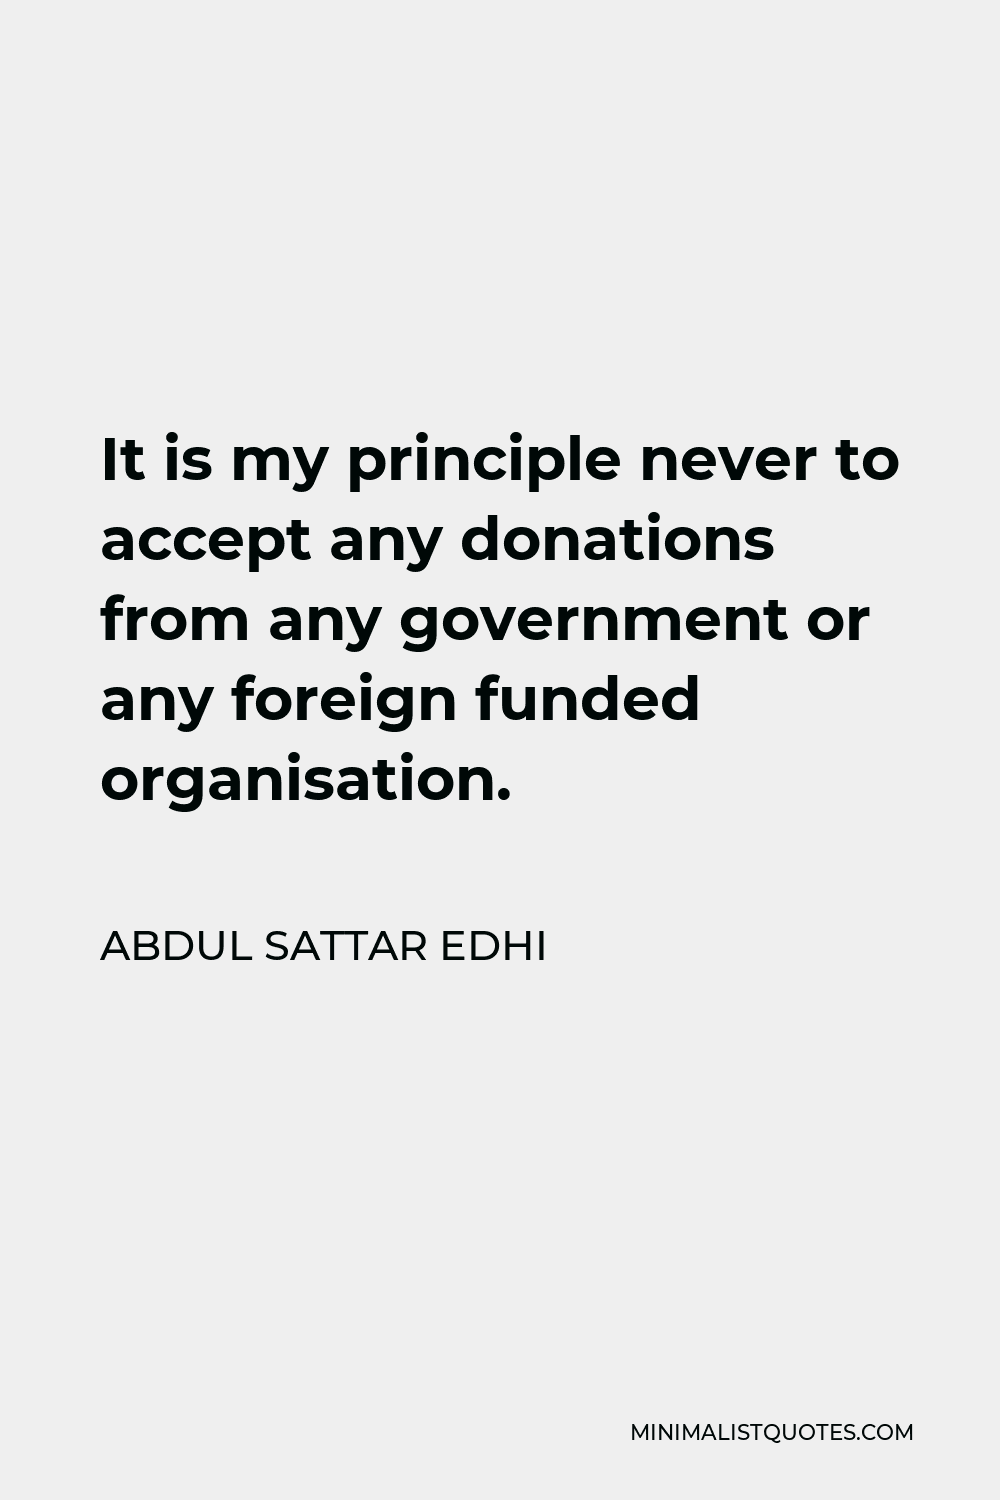 Abdul Sattar Edhi Quote - It is my principle never to accept any donations from any government or any foreign funded organisation.